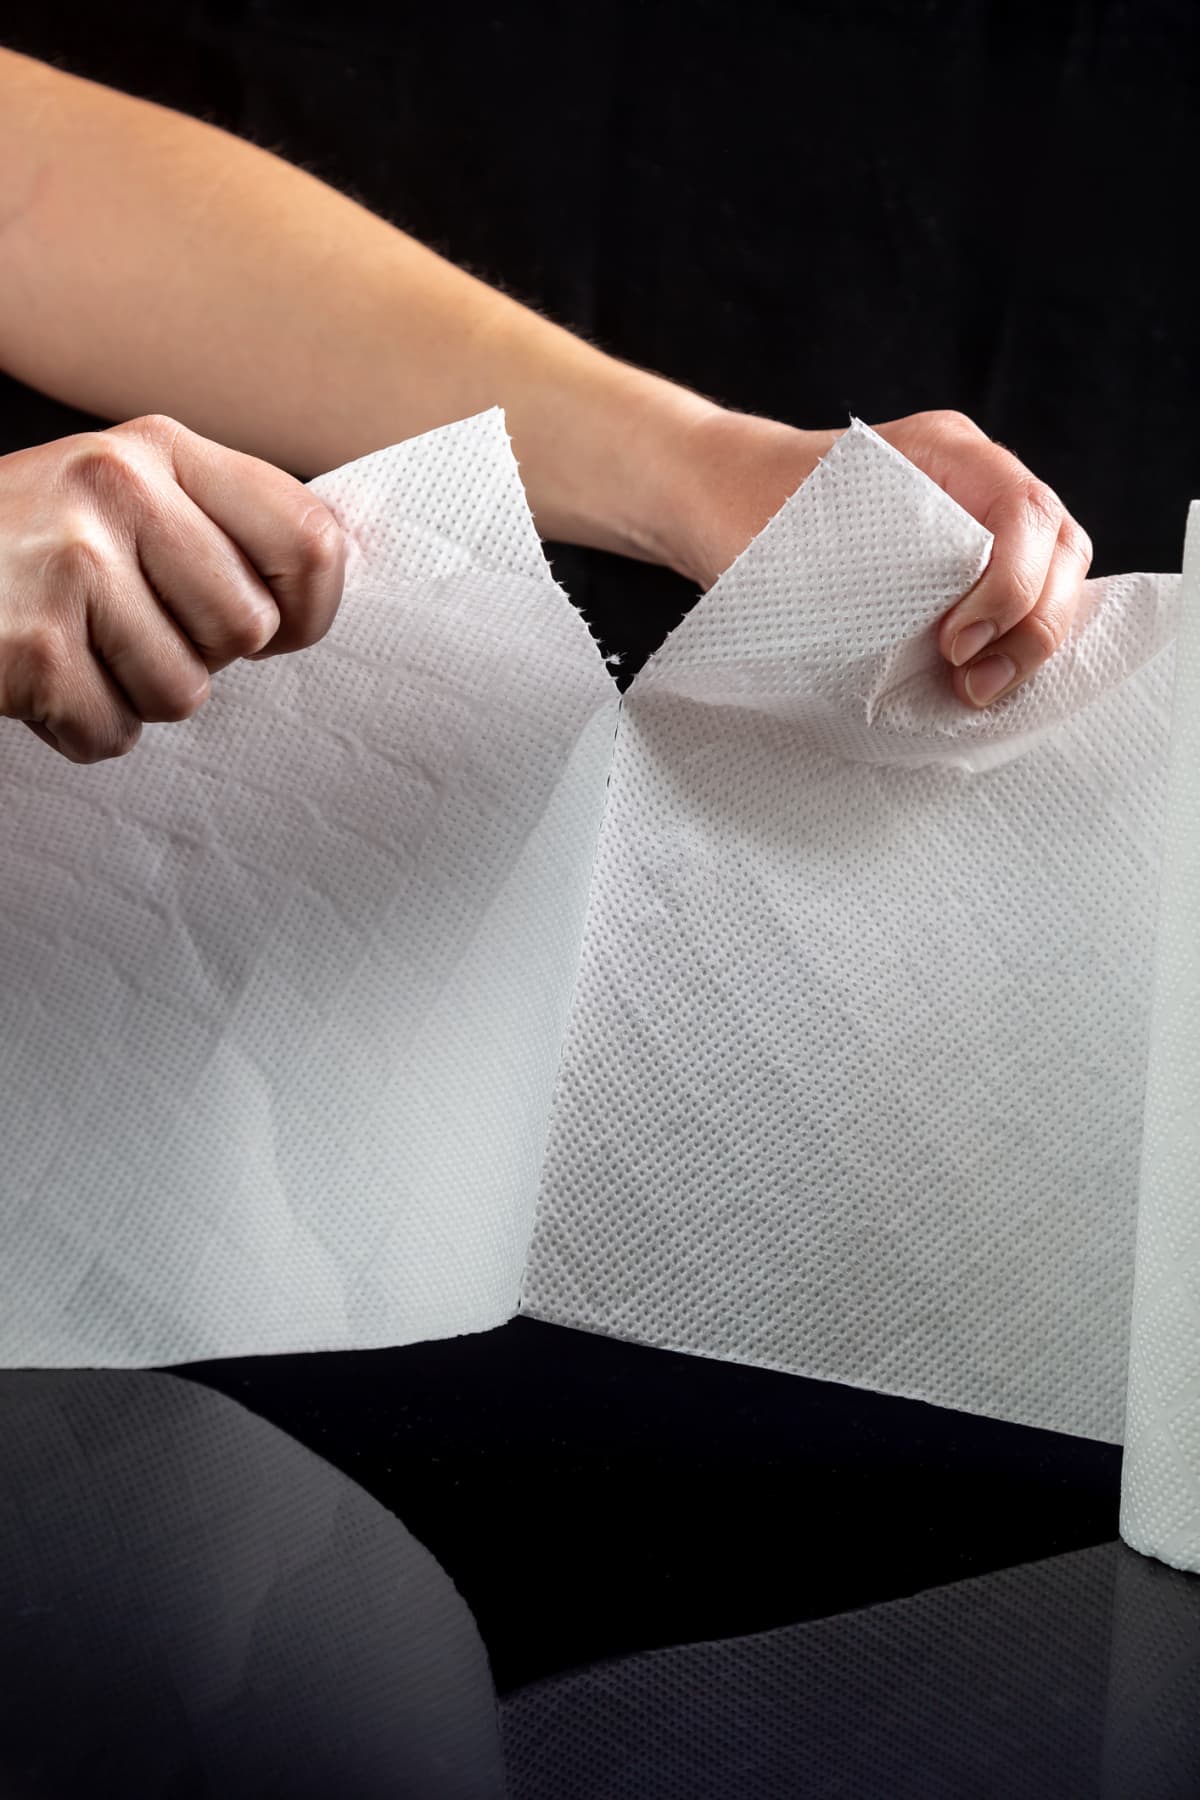 A person tearing off a piece of white paper towel from a roll